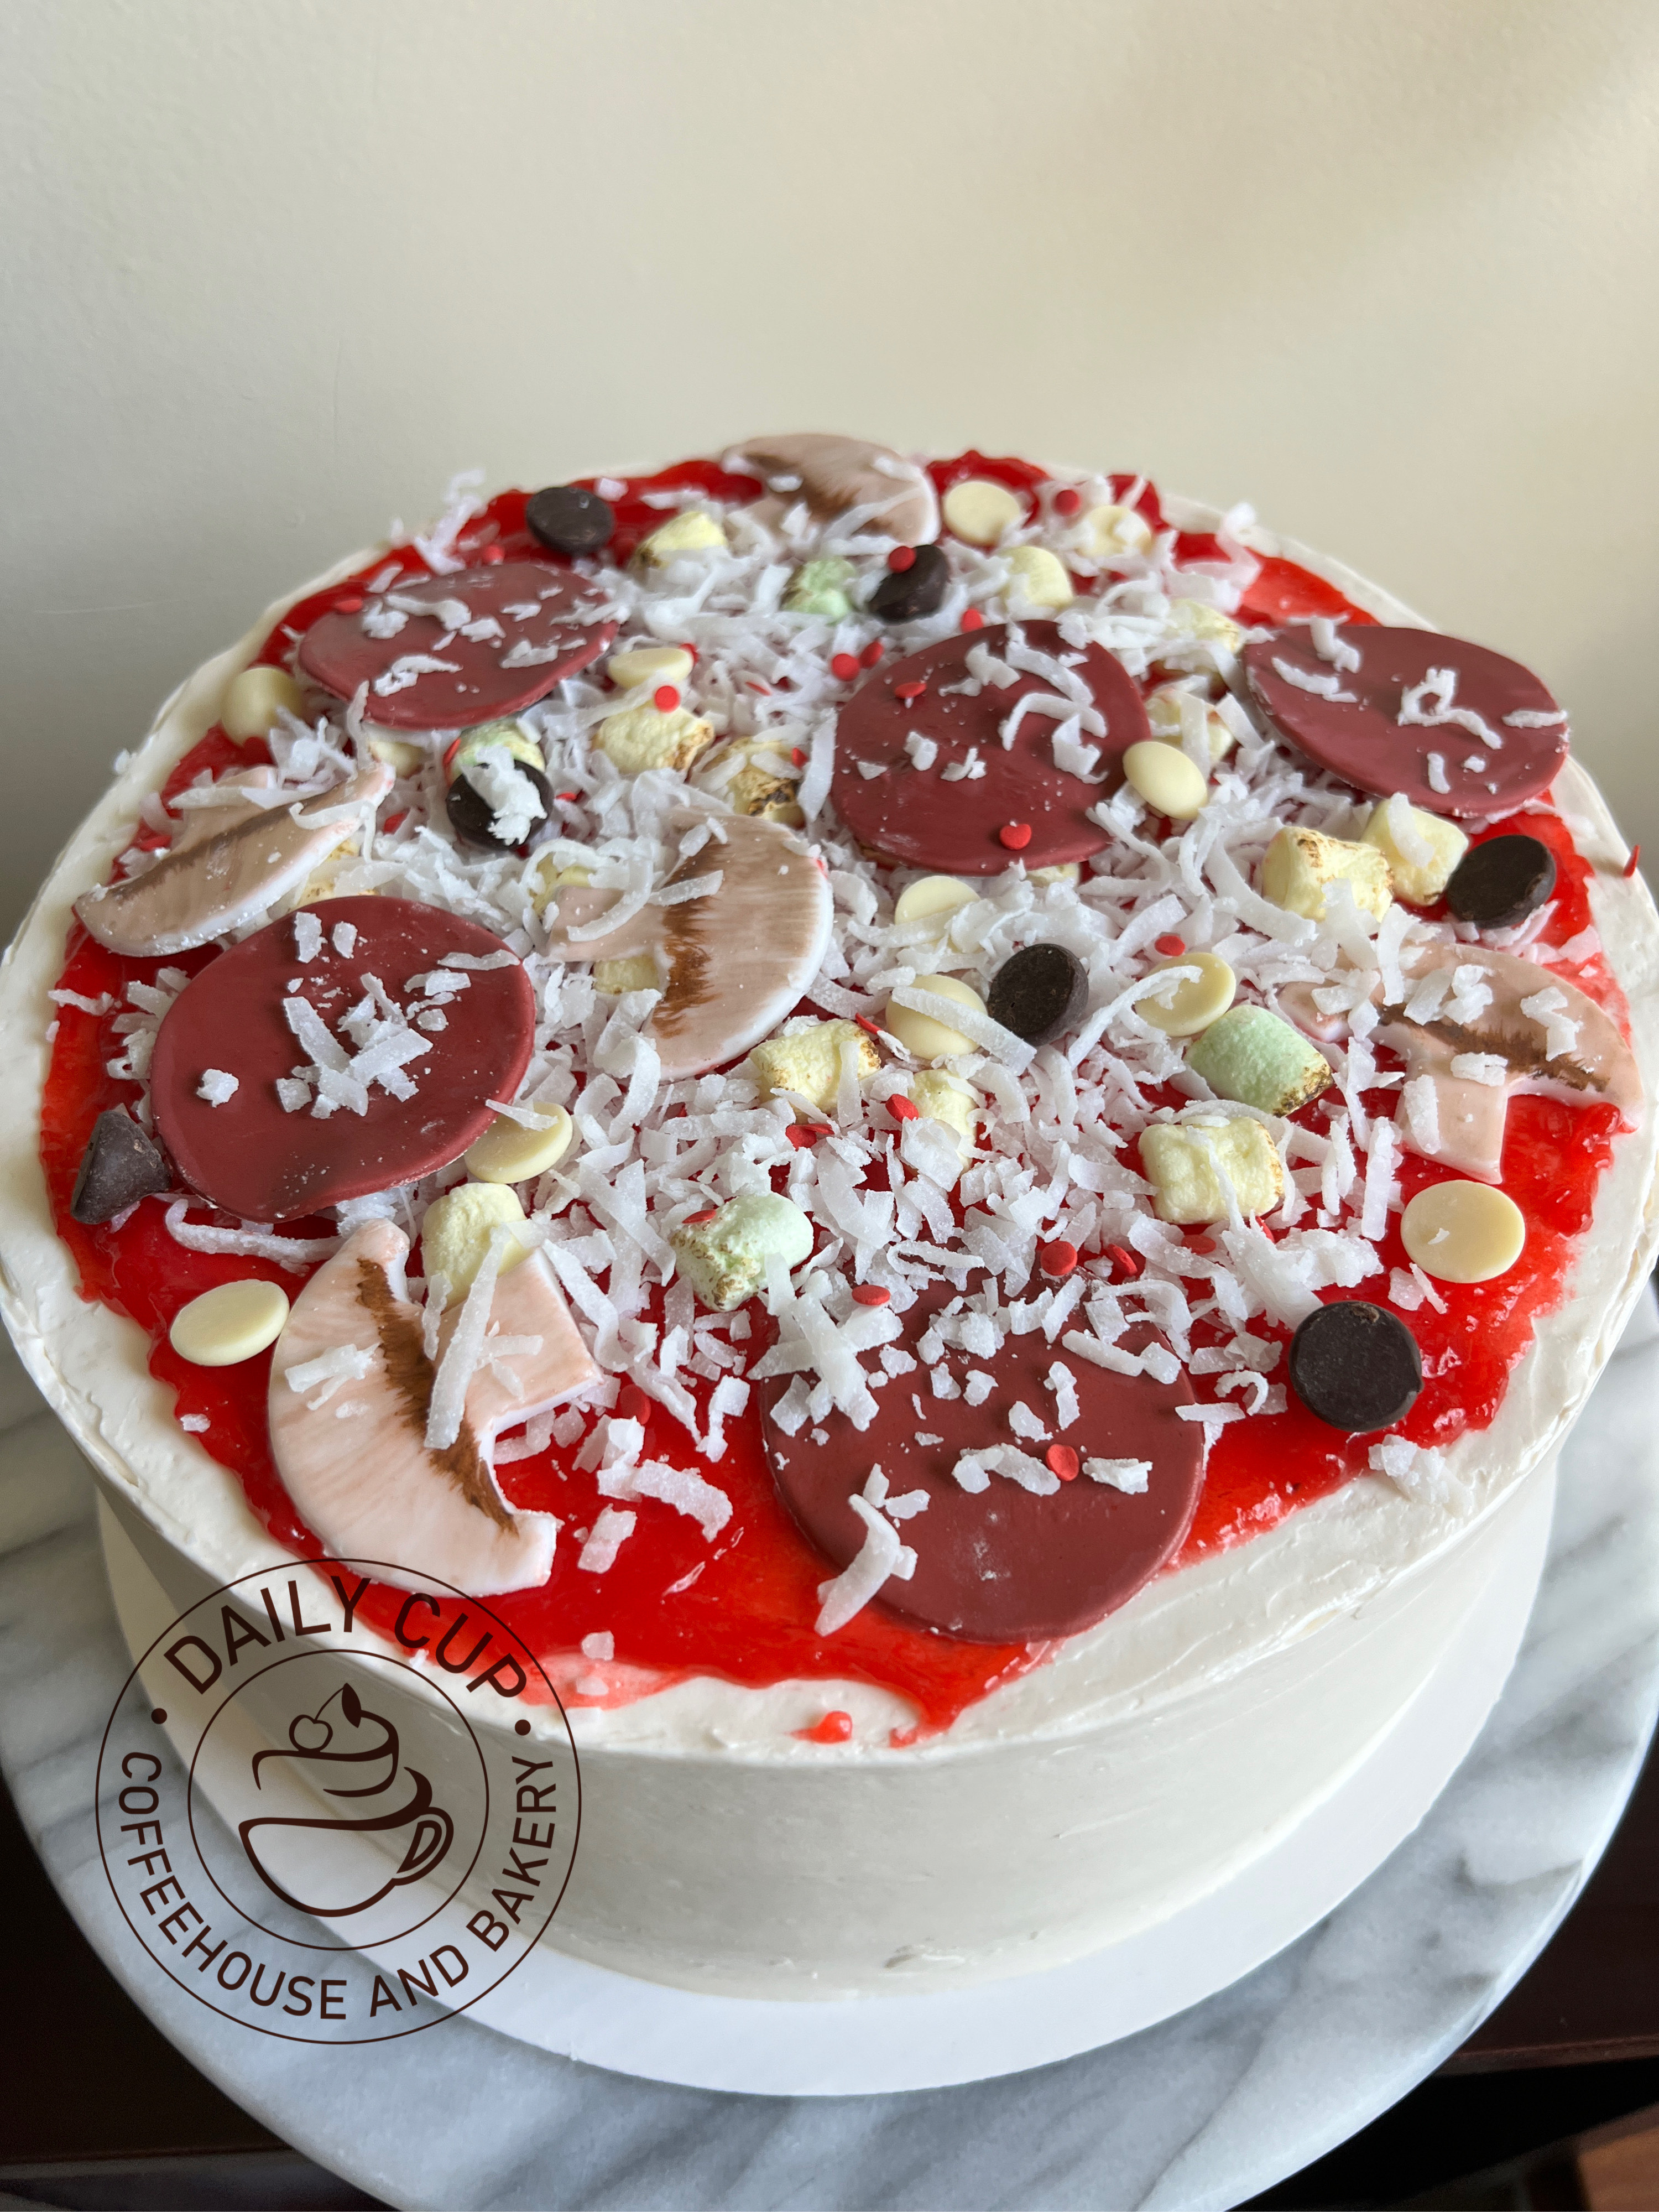 Pizza Cake by Daily Cup Coffeehouse and Bakery